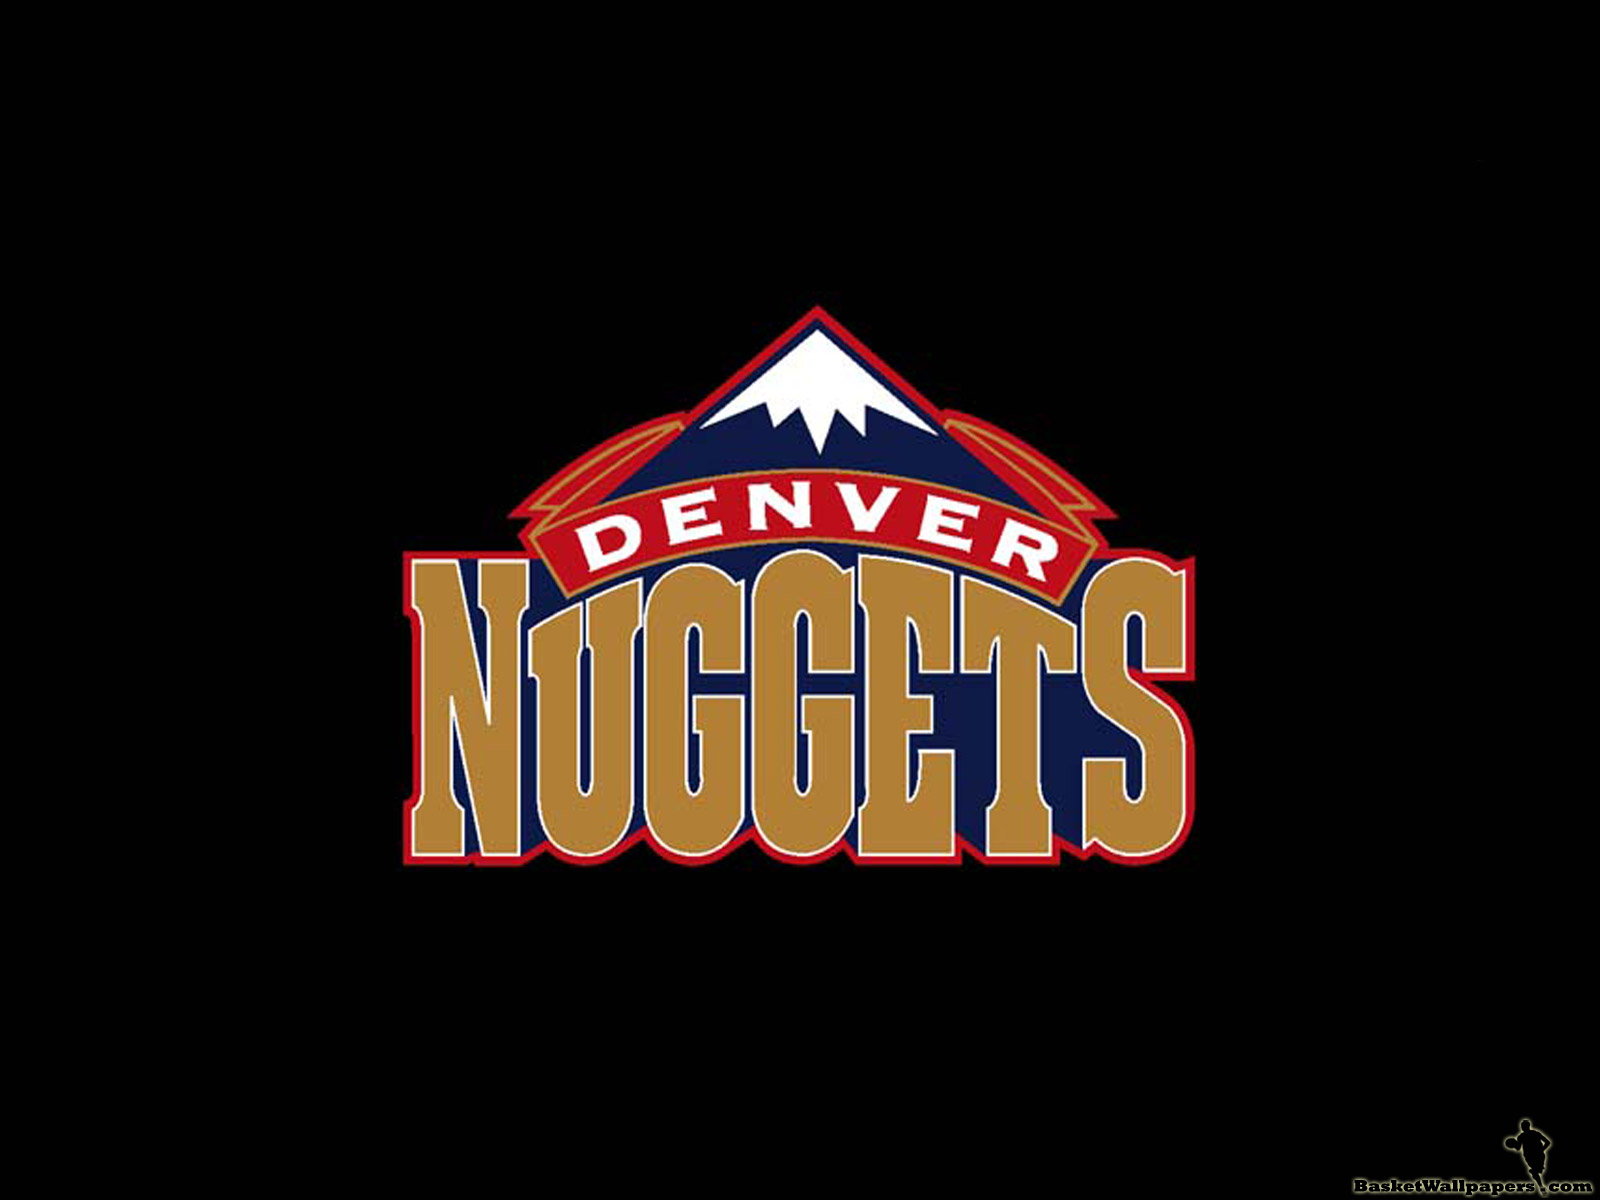 The first one is wallpaper with Denver Nuggets logo in the middle and black 